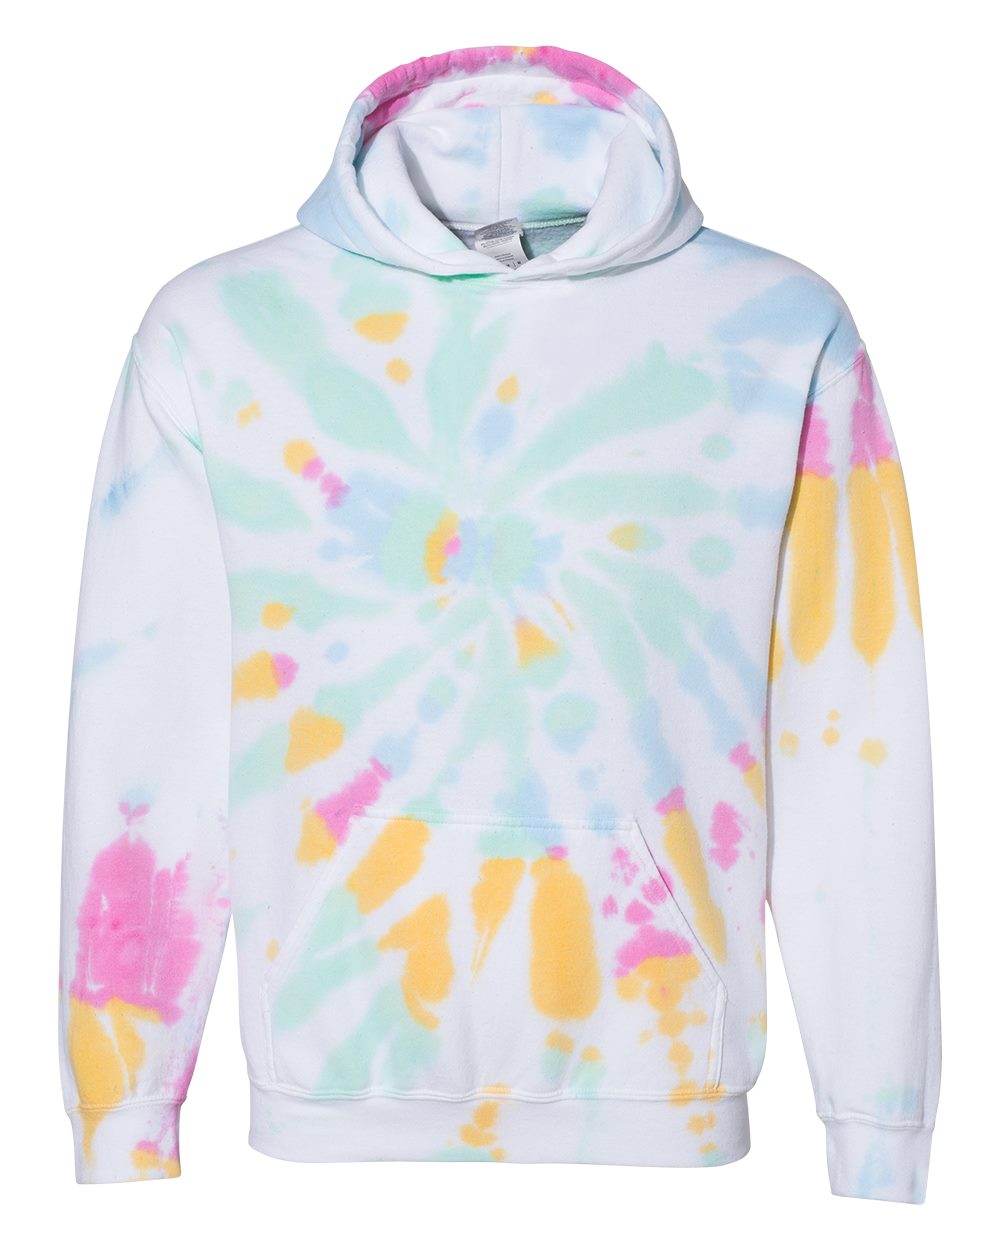 Independent Trading Co. PRM1500TD Youth Midweight Tie Dye Hooded Pullover - Tie Dye Sunset Swirl, XL